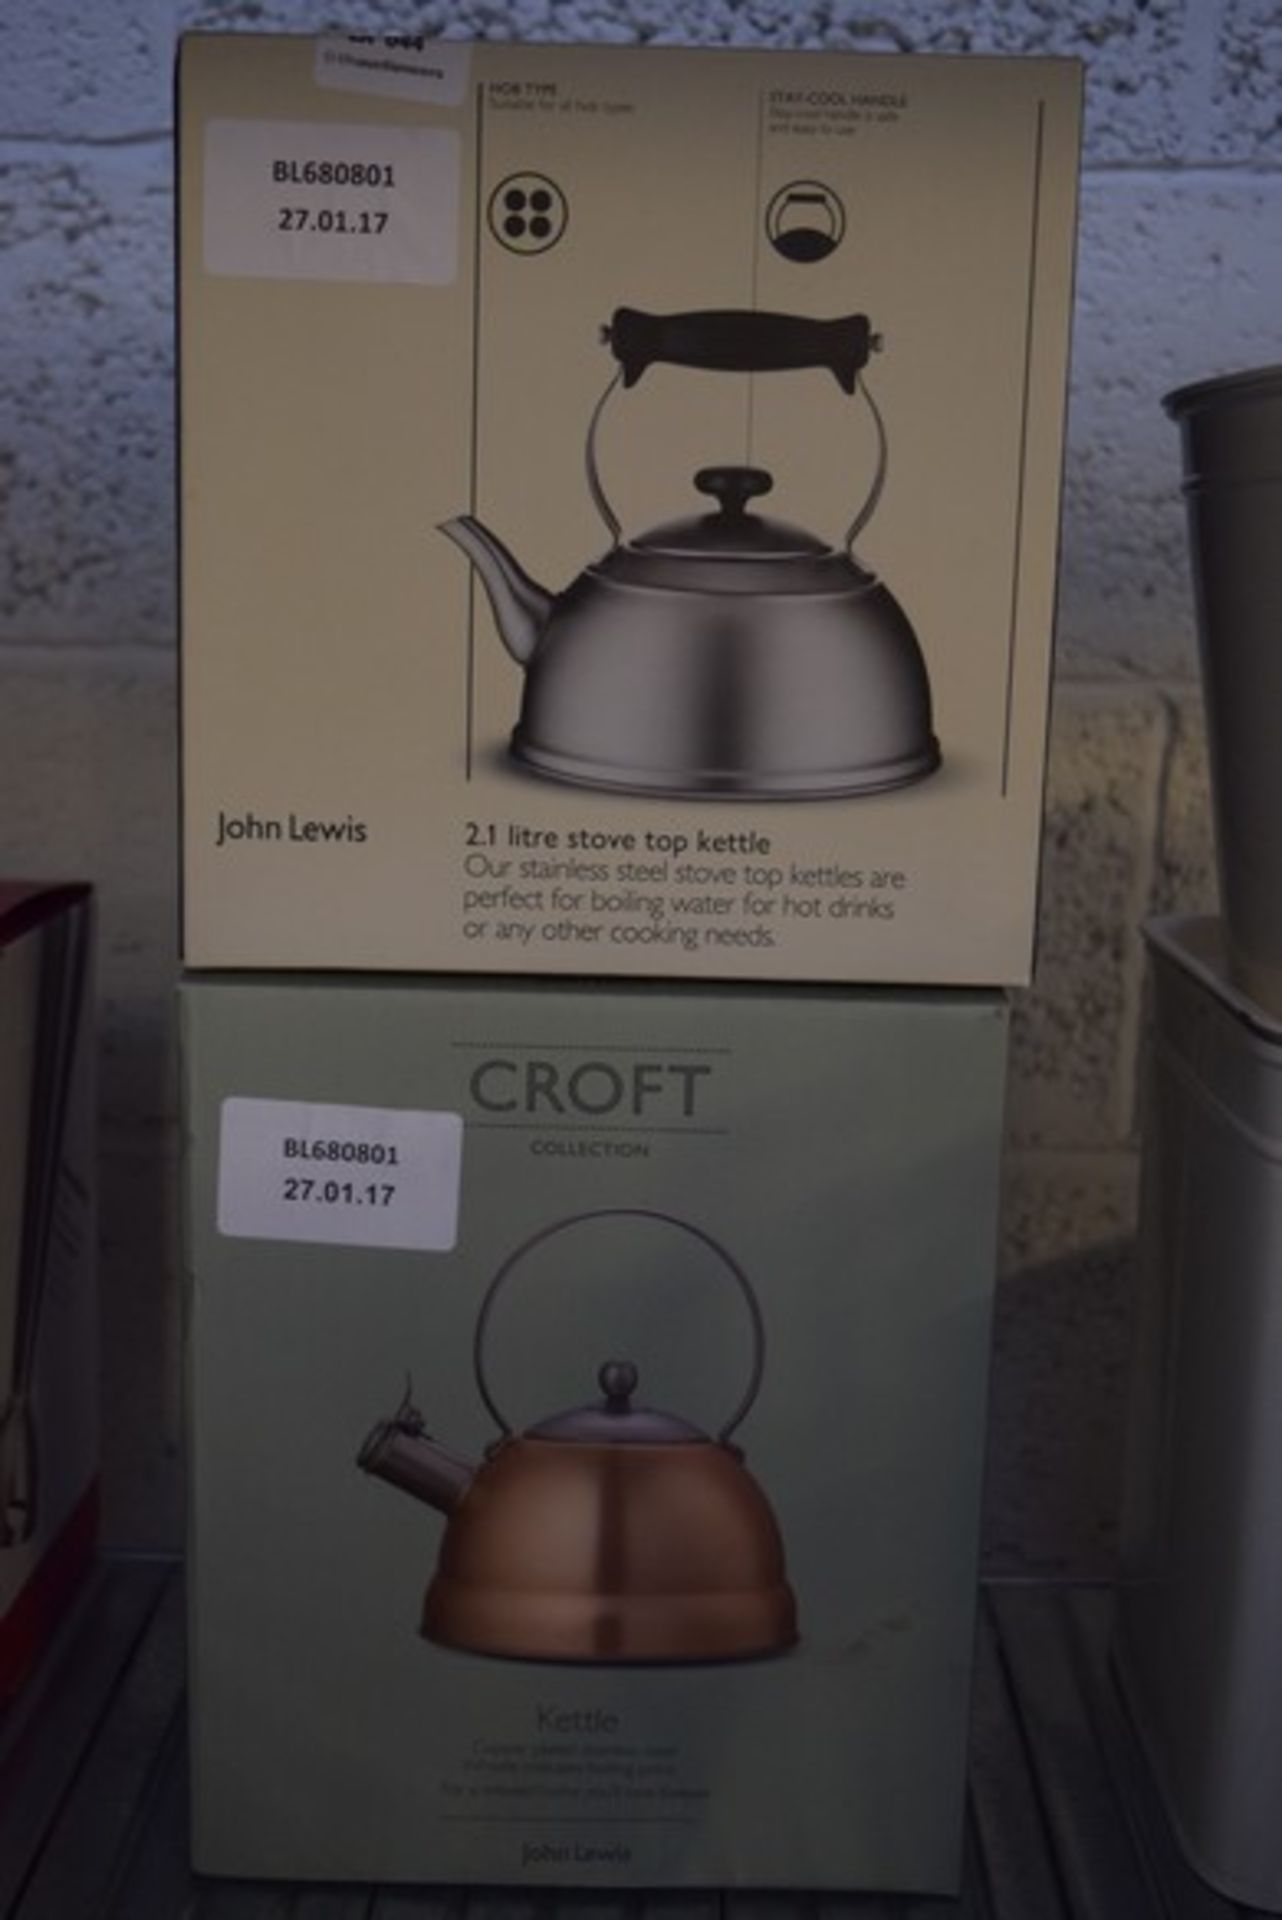 2 X ASSORTED STOVE TOP KETTLES IN COPPER PLATED STAINLESS STEEL AND STAINLESS STEEL COMBINED RRP £